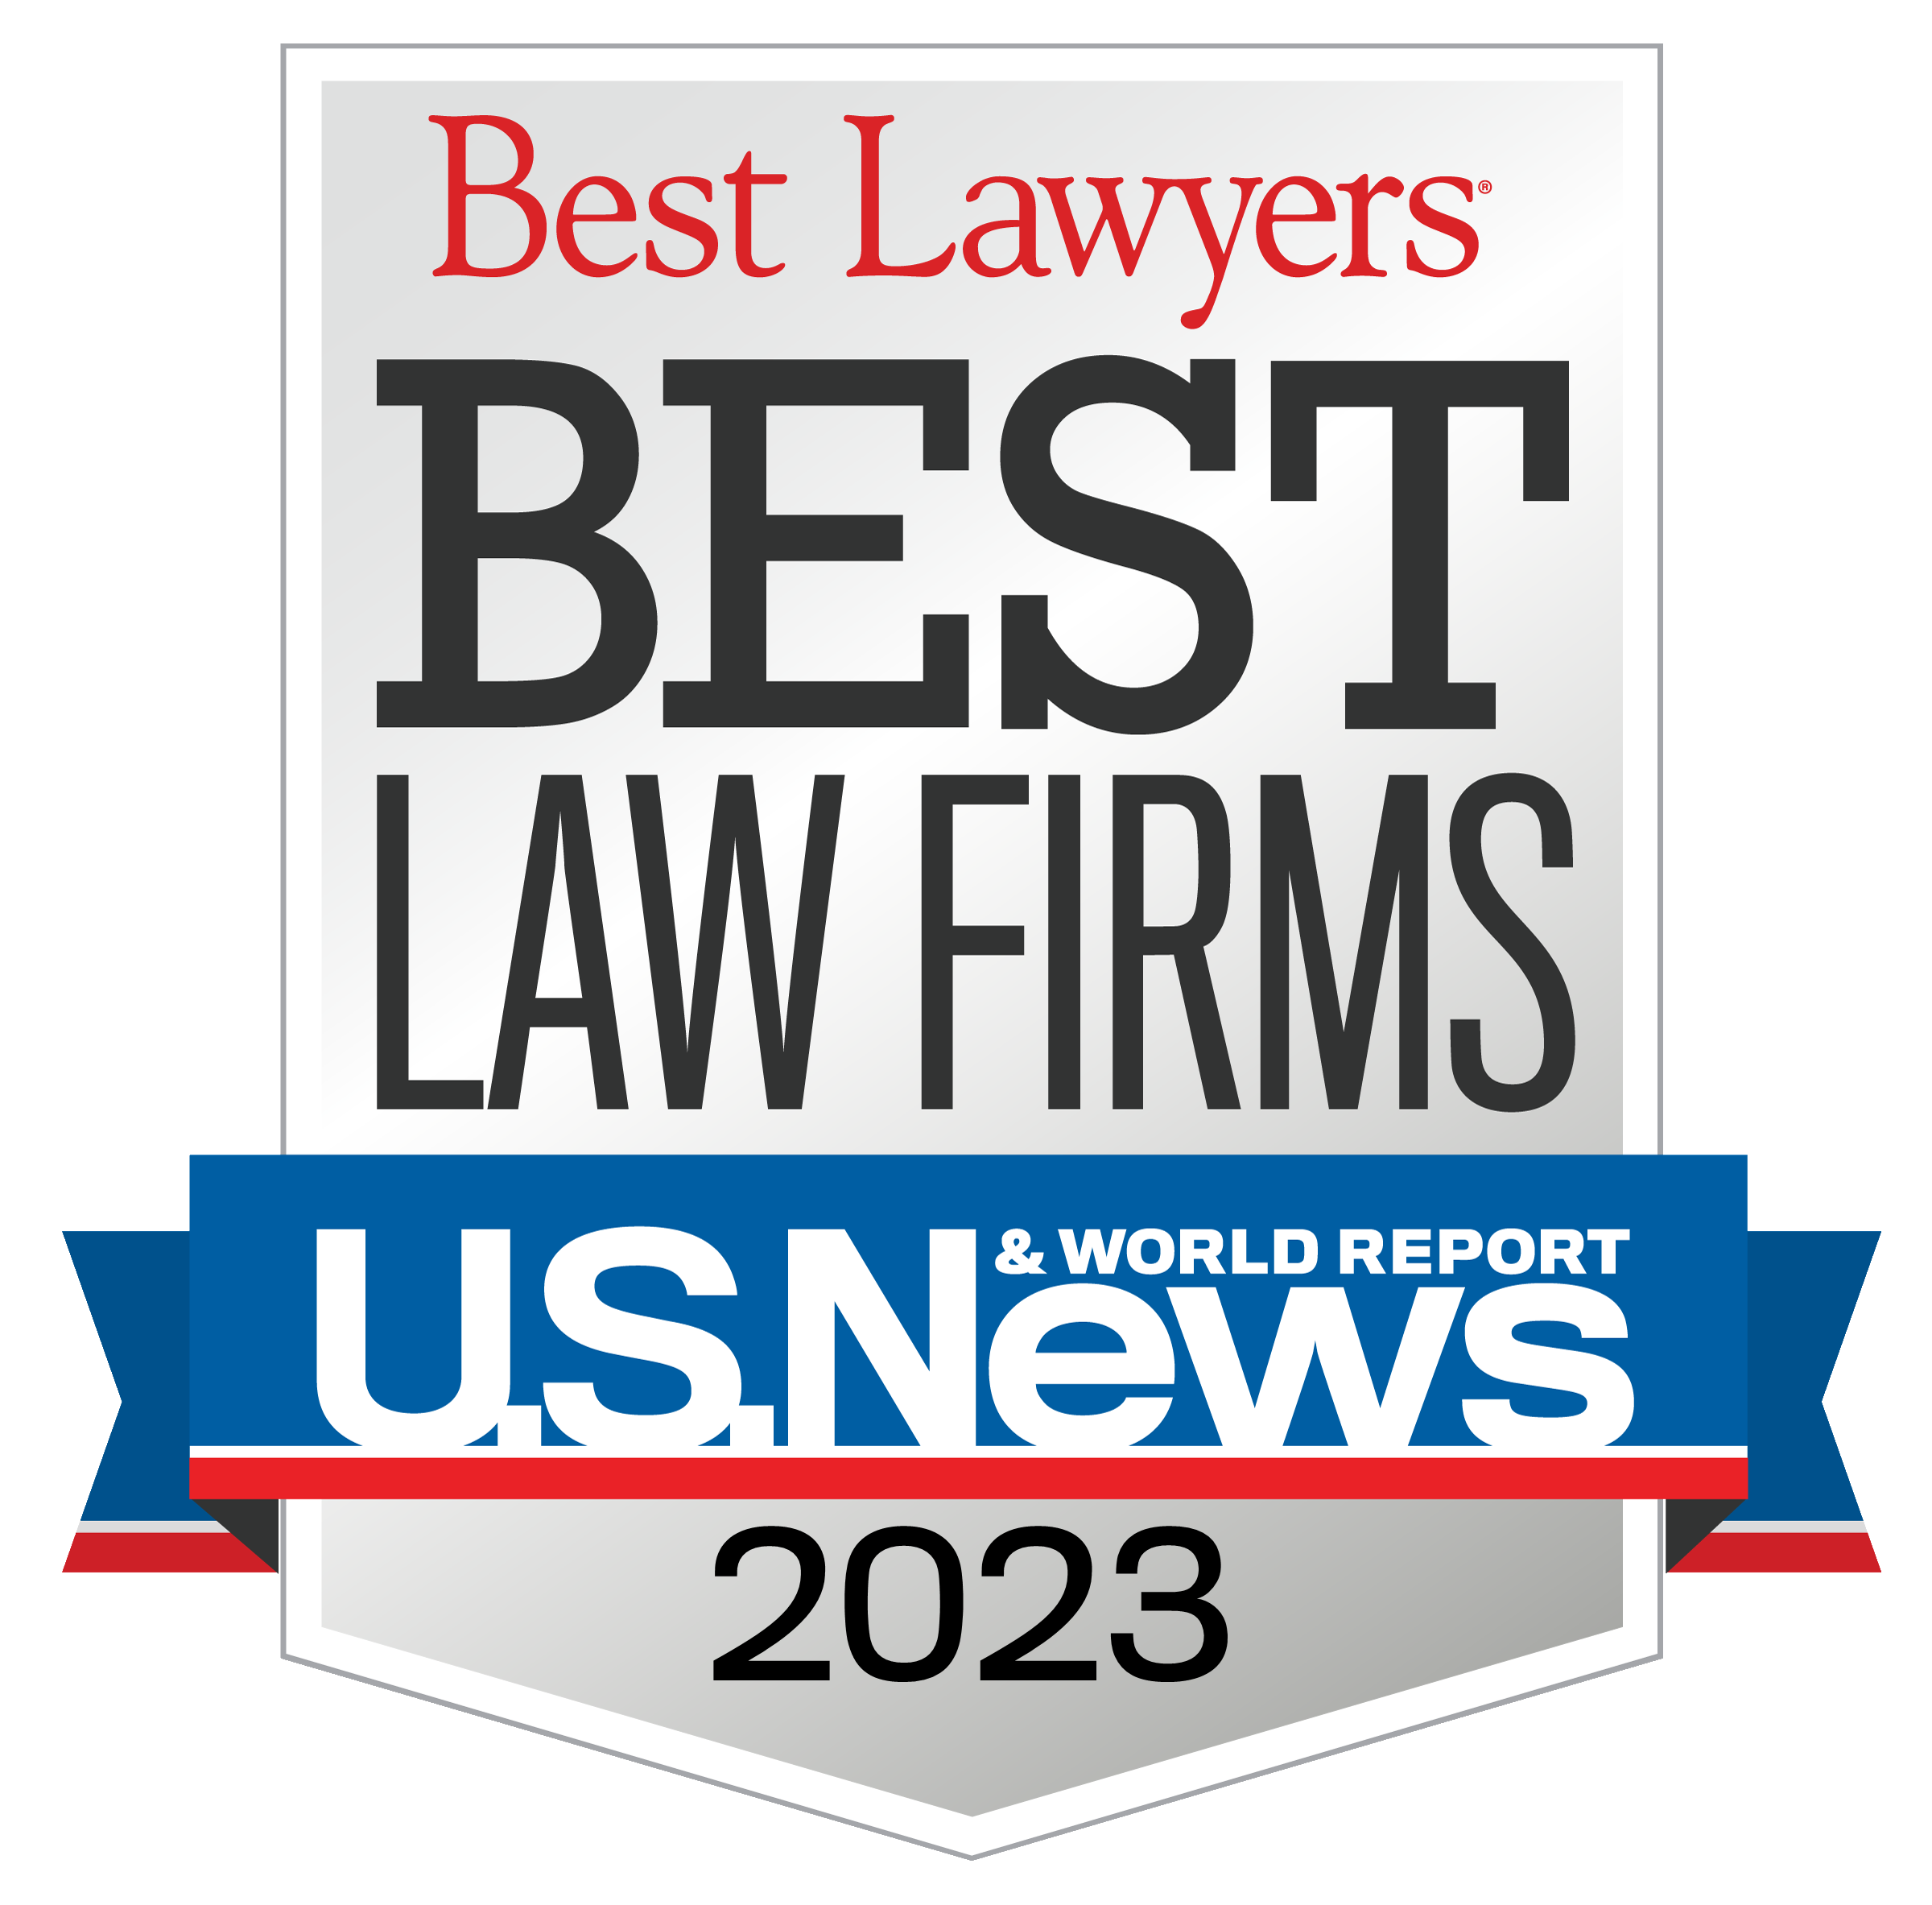 Best lawyers and law firms in the US based on practice areas according to the 2020 US News report.